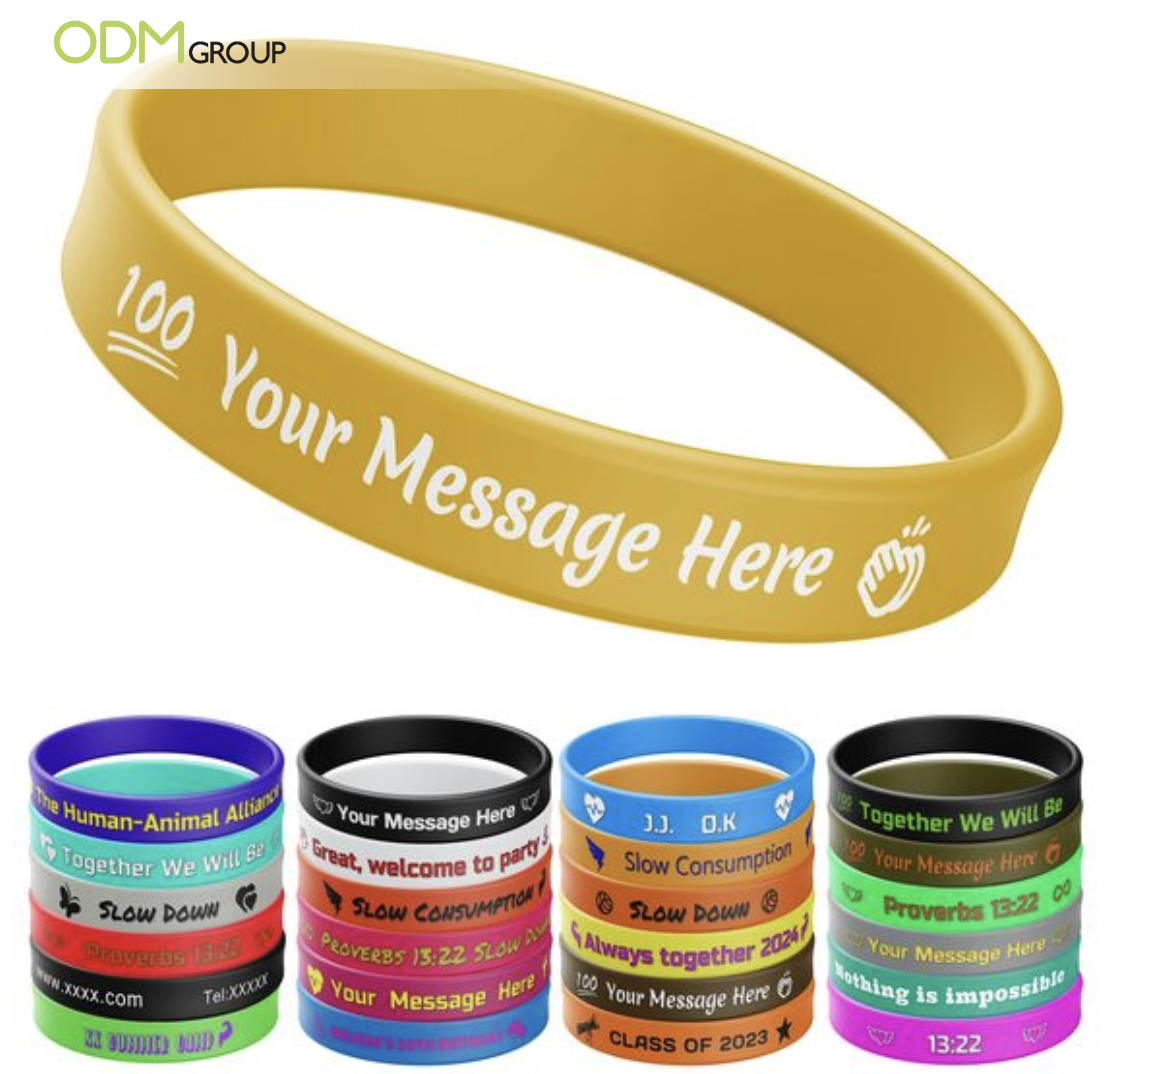 Customizable motivational wristbands in various colors.